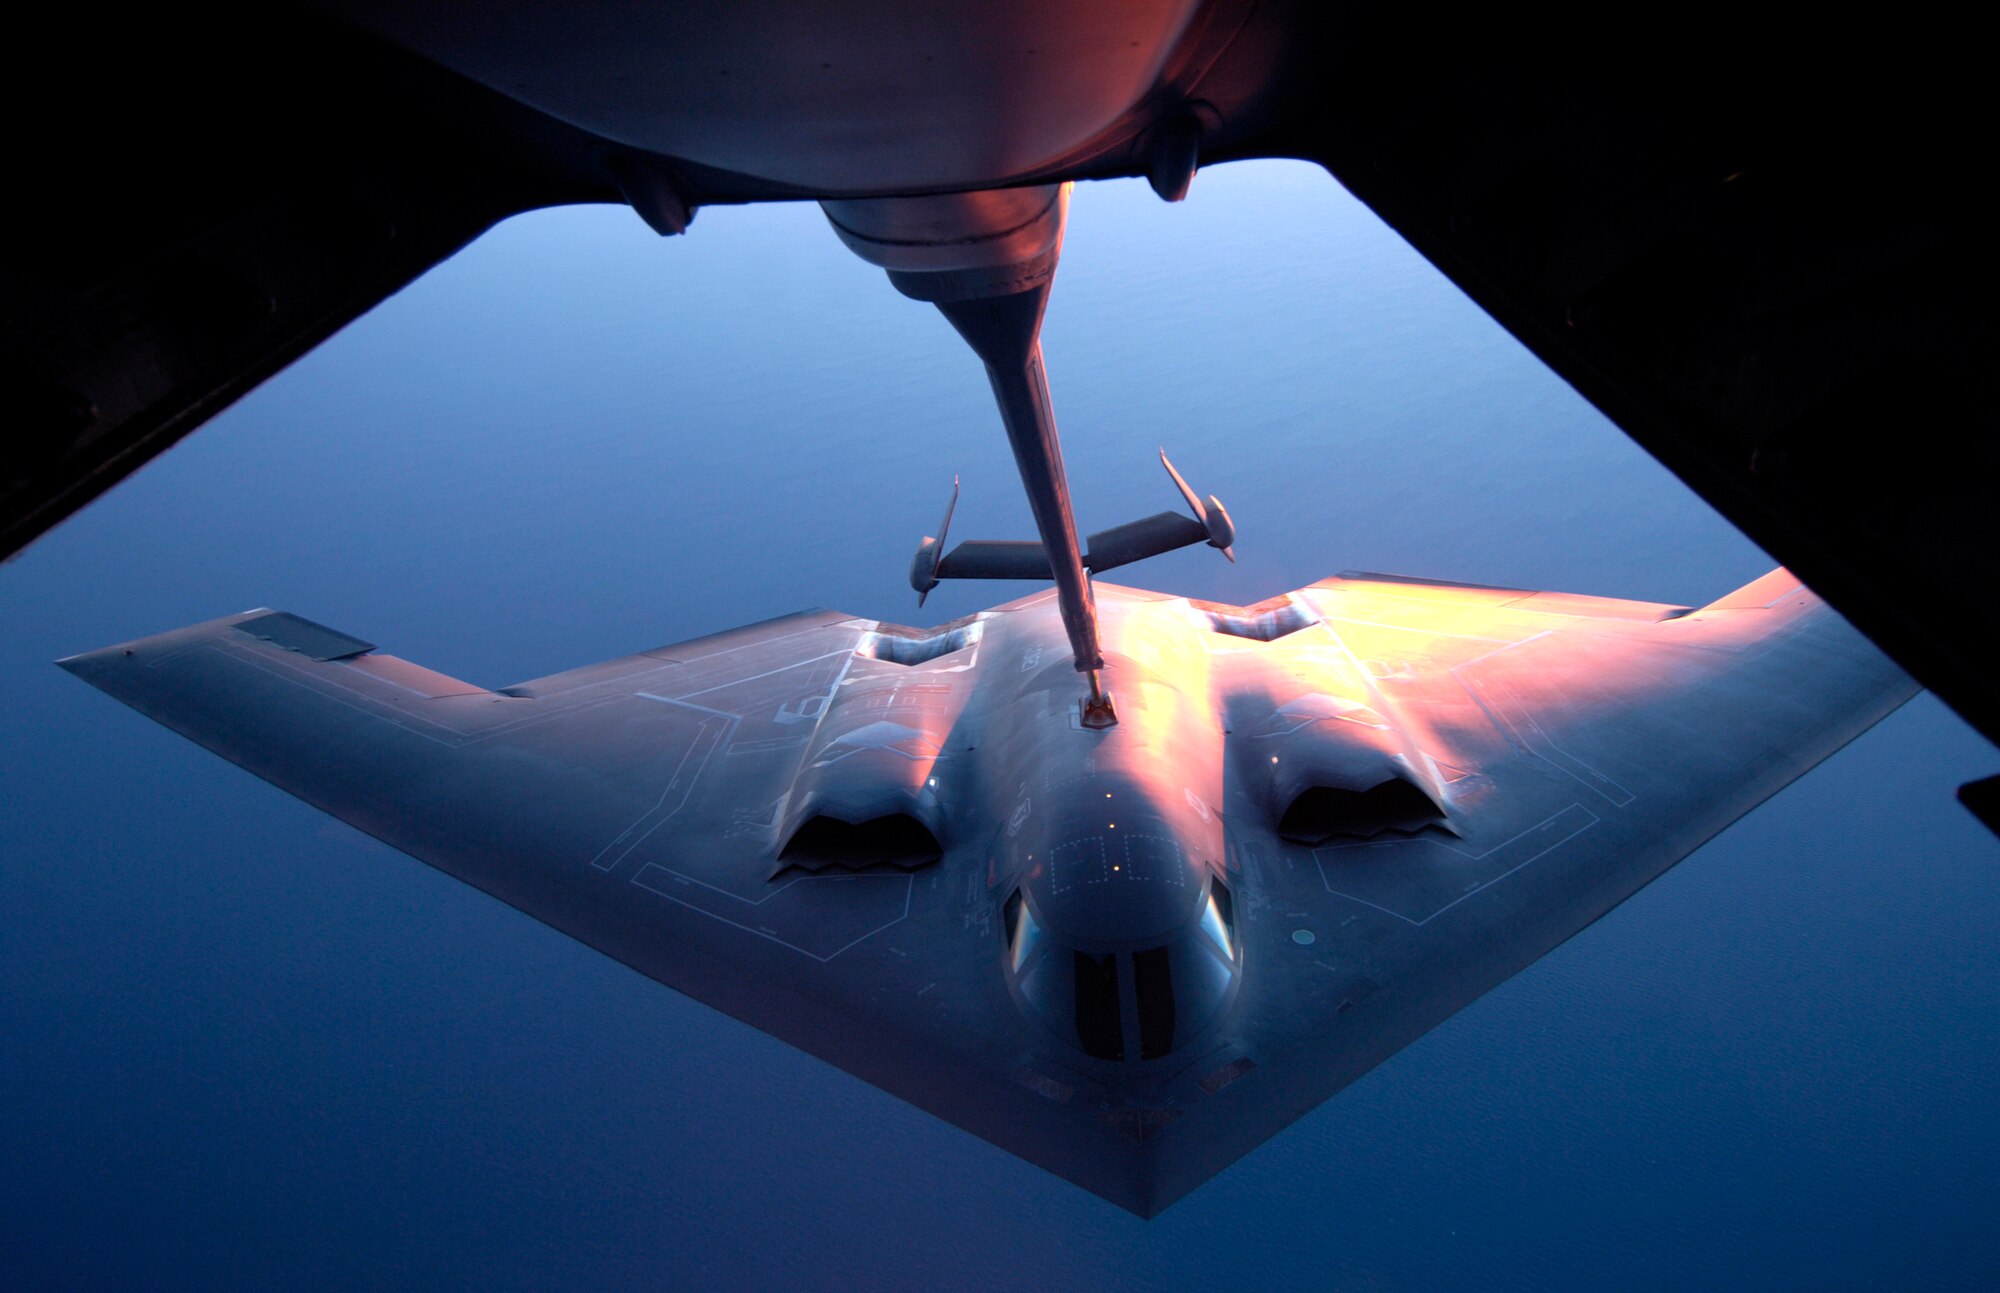 A B-2 Spirit is refueled by a KC-10 Extender over Australia during exercise Green Lightning on Tuesday, July 25. The KC-10 and B-2 are from the 36th Expeditionary Wing at Guam. The exercise will test U.S. capabilities and provide operational familiarity in the region for the Pacific bomber presence as well as serve to enhance relations with the Australians. (U.S. Air Force photo/ Tech. Sgt. Shane A. Cuomo)